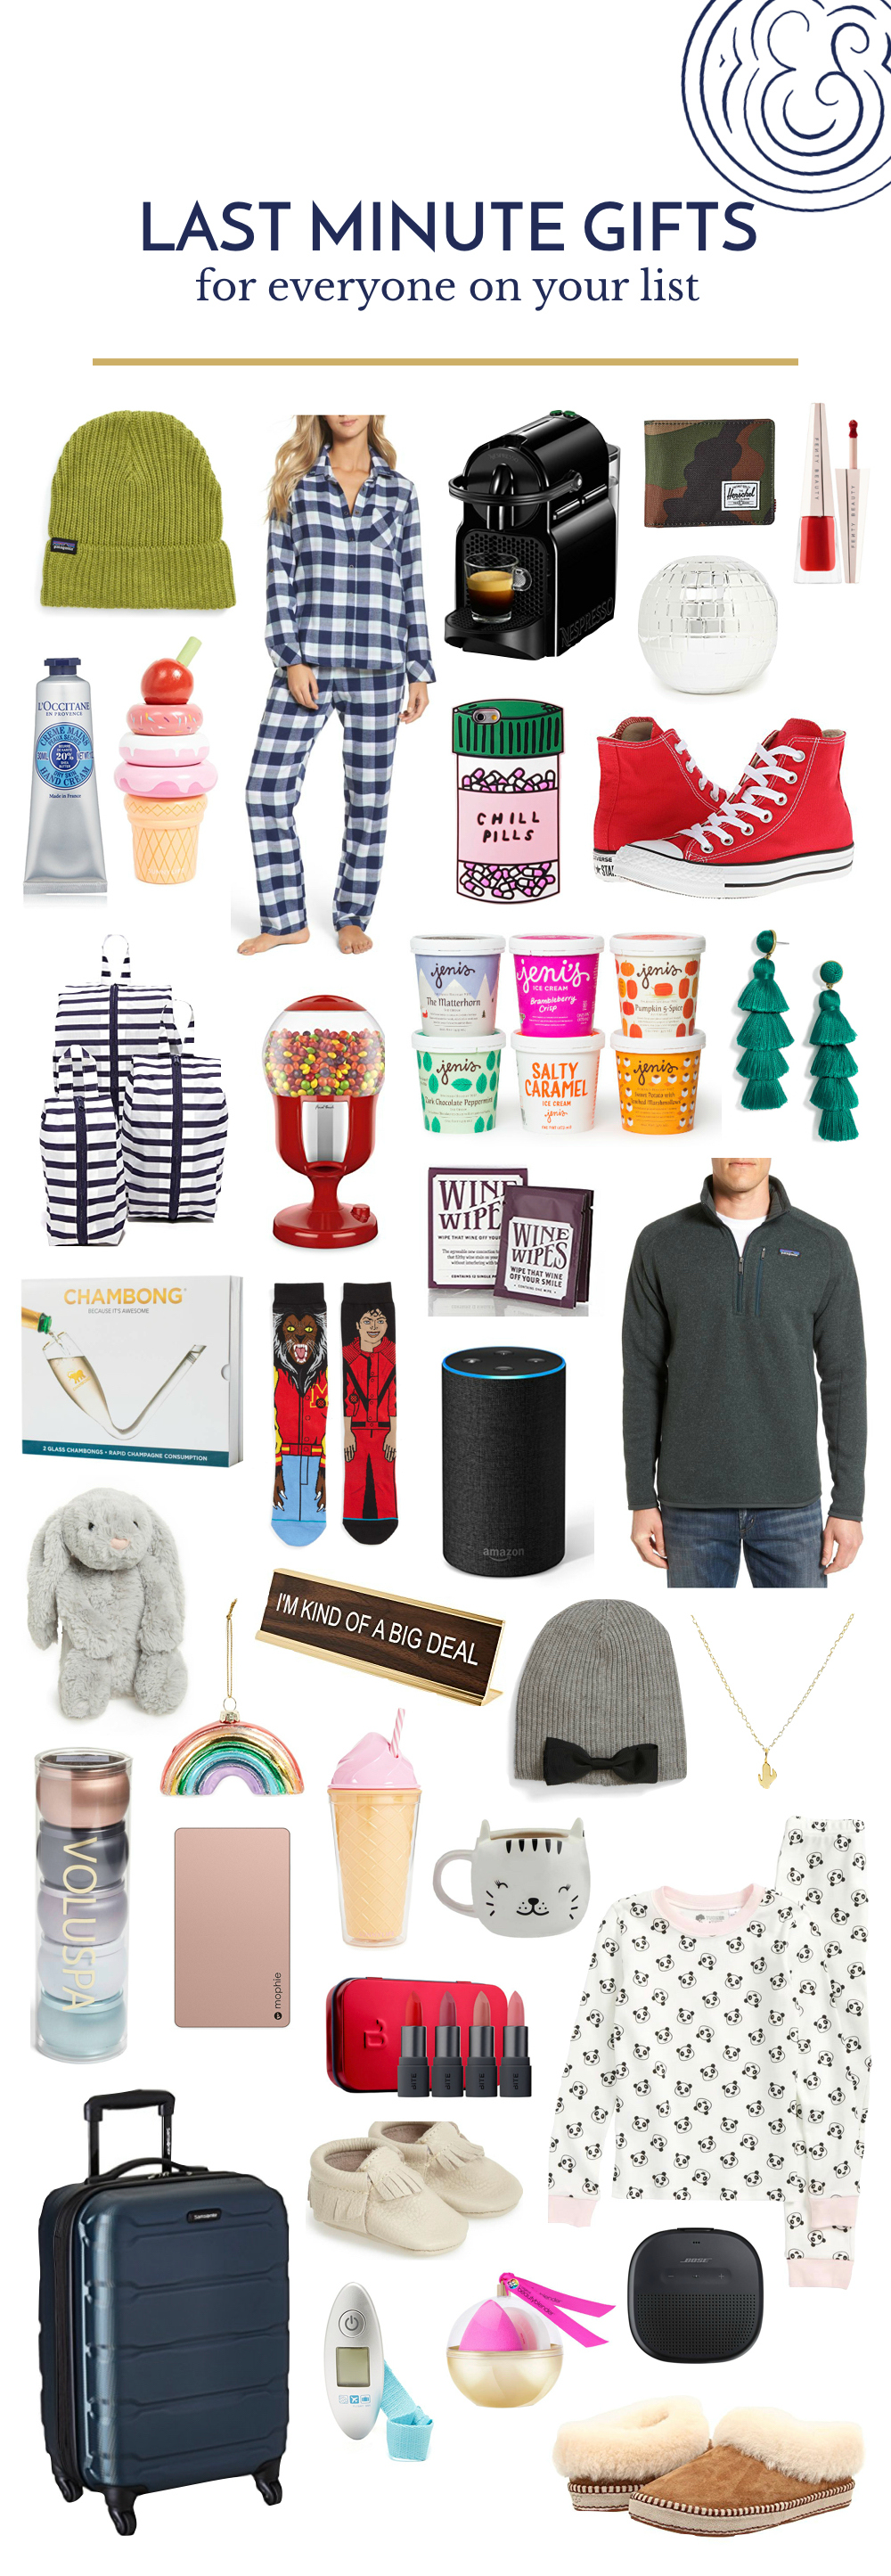 Last Minute Gift Ideas for Everyone On Your Shopping List.